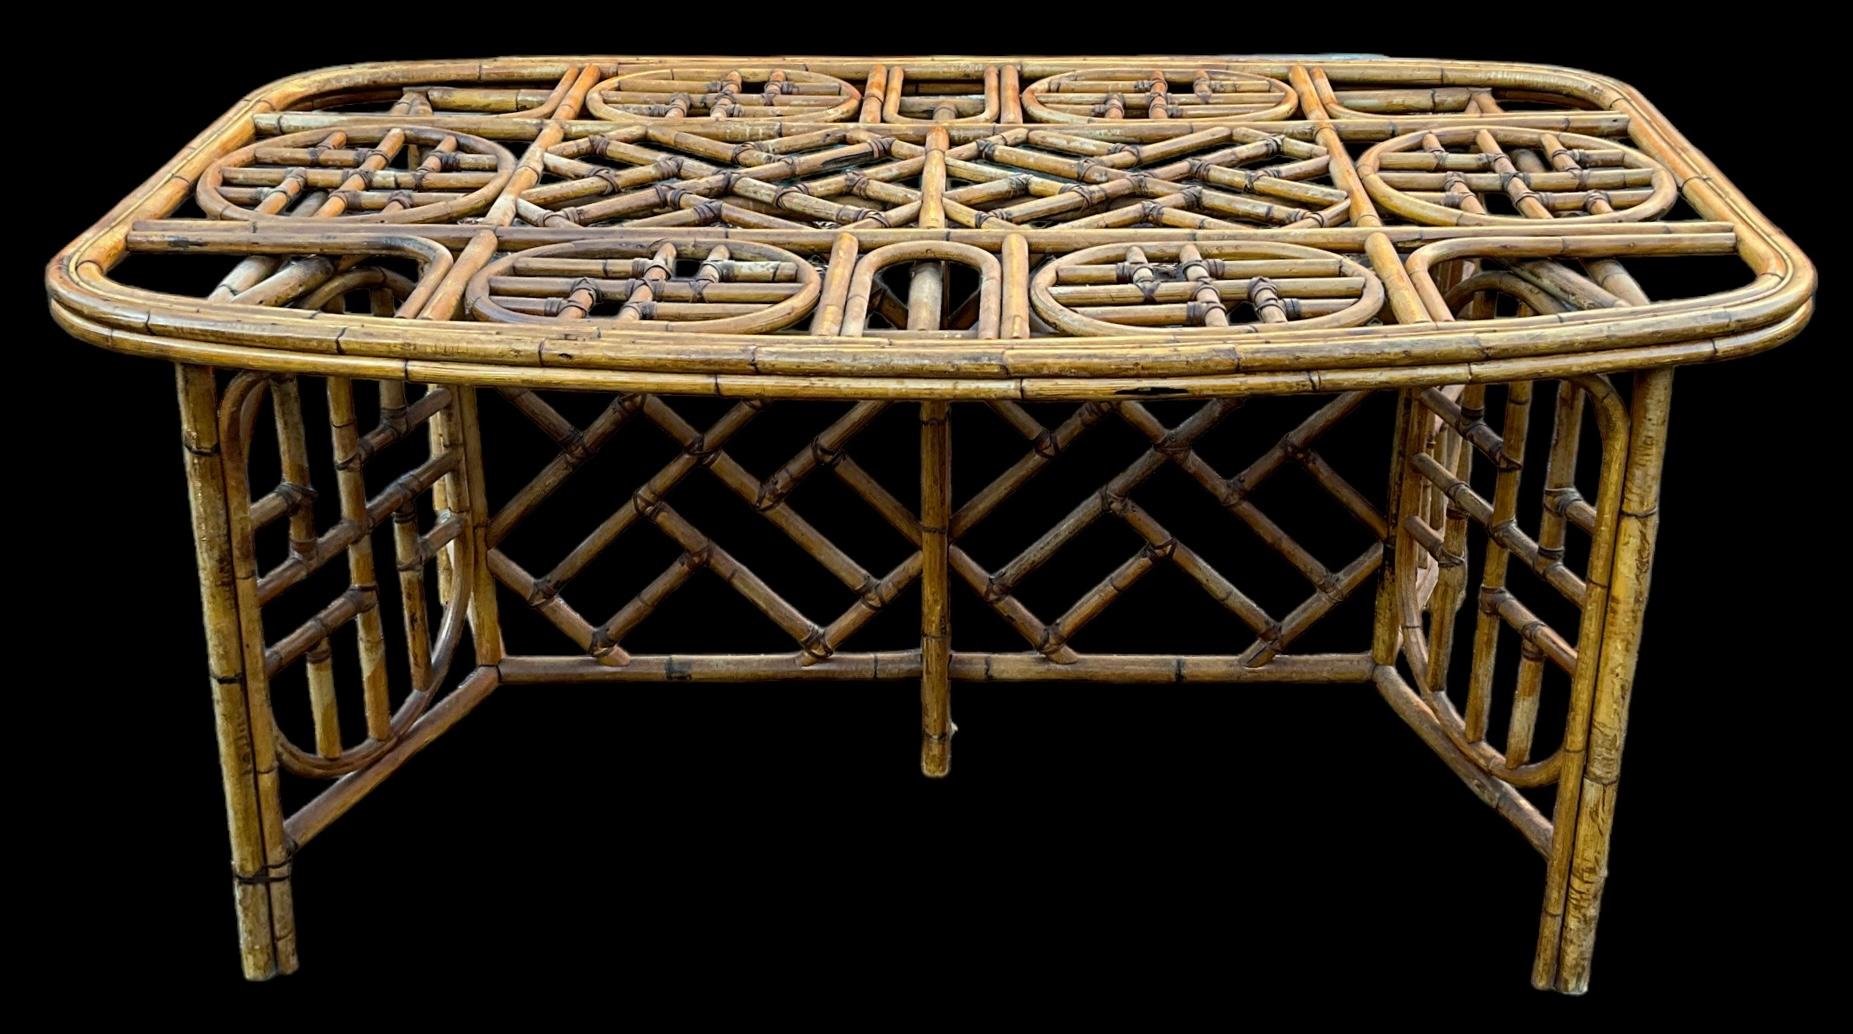 This is an awesome table! This is an organic modern bamboo dining table with recessed glass top. If you wanted to switch to a rectangular top, then that should work because it would sit on the base as opposed to in it. The bamboo has a statement